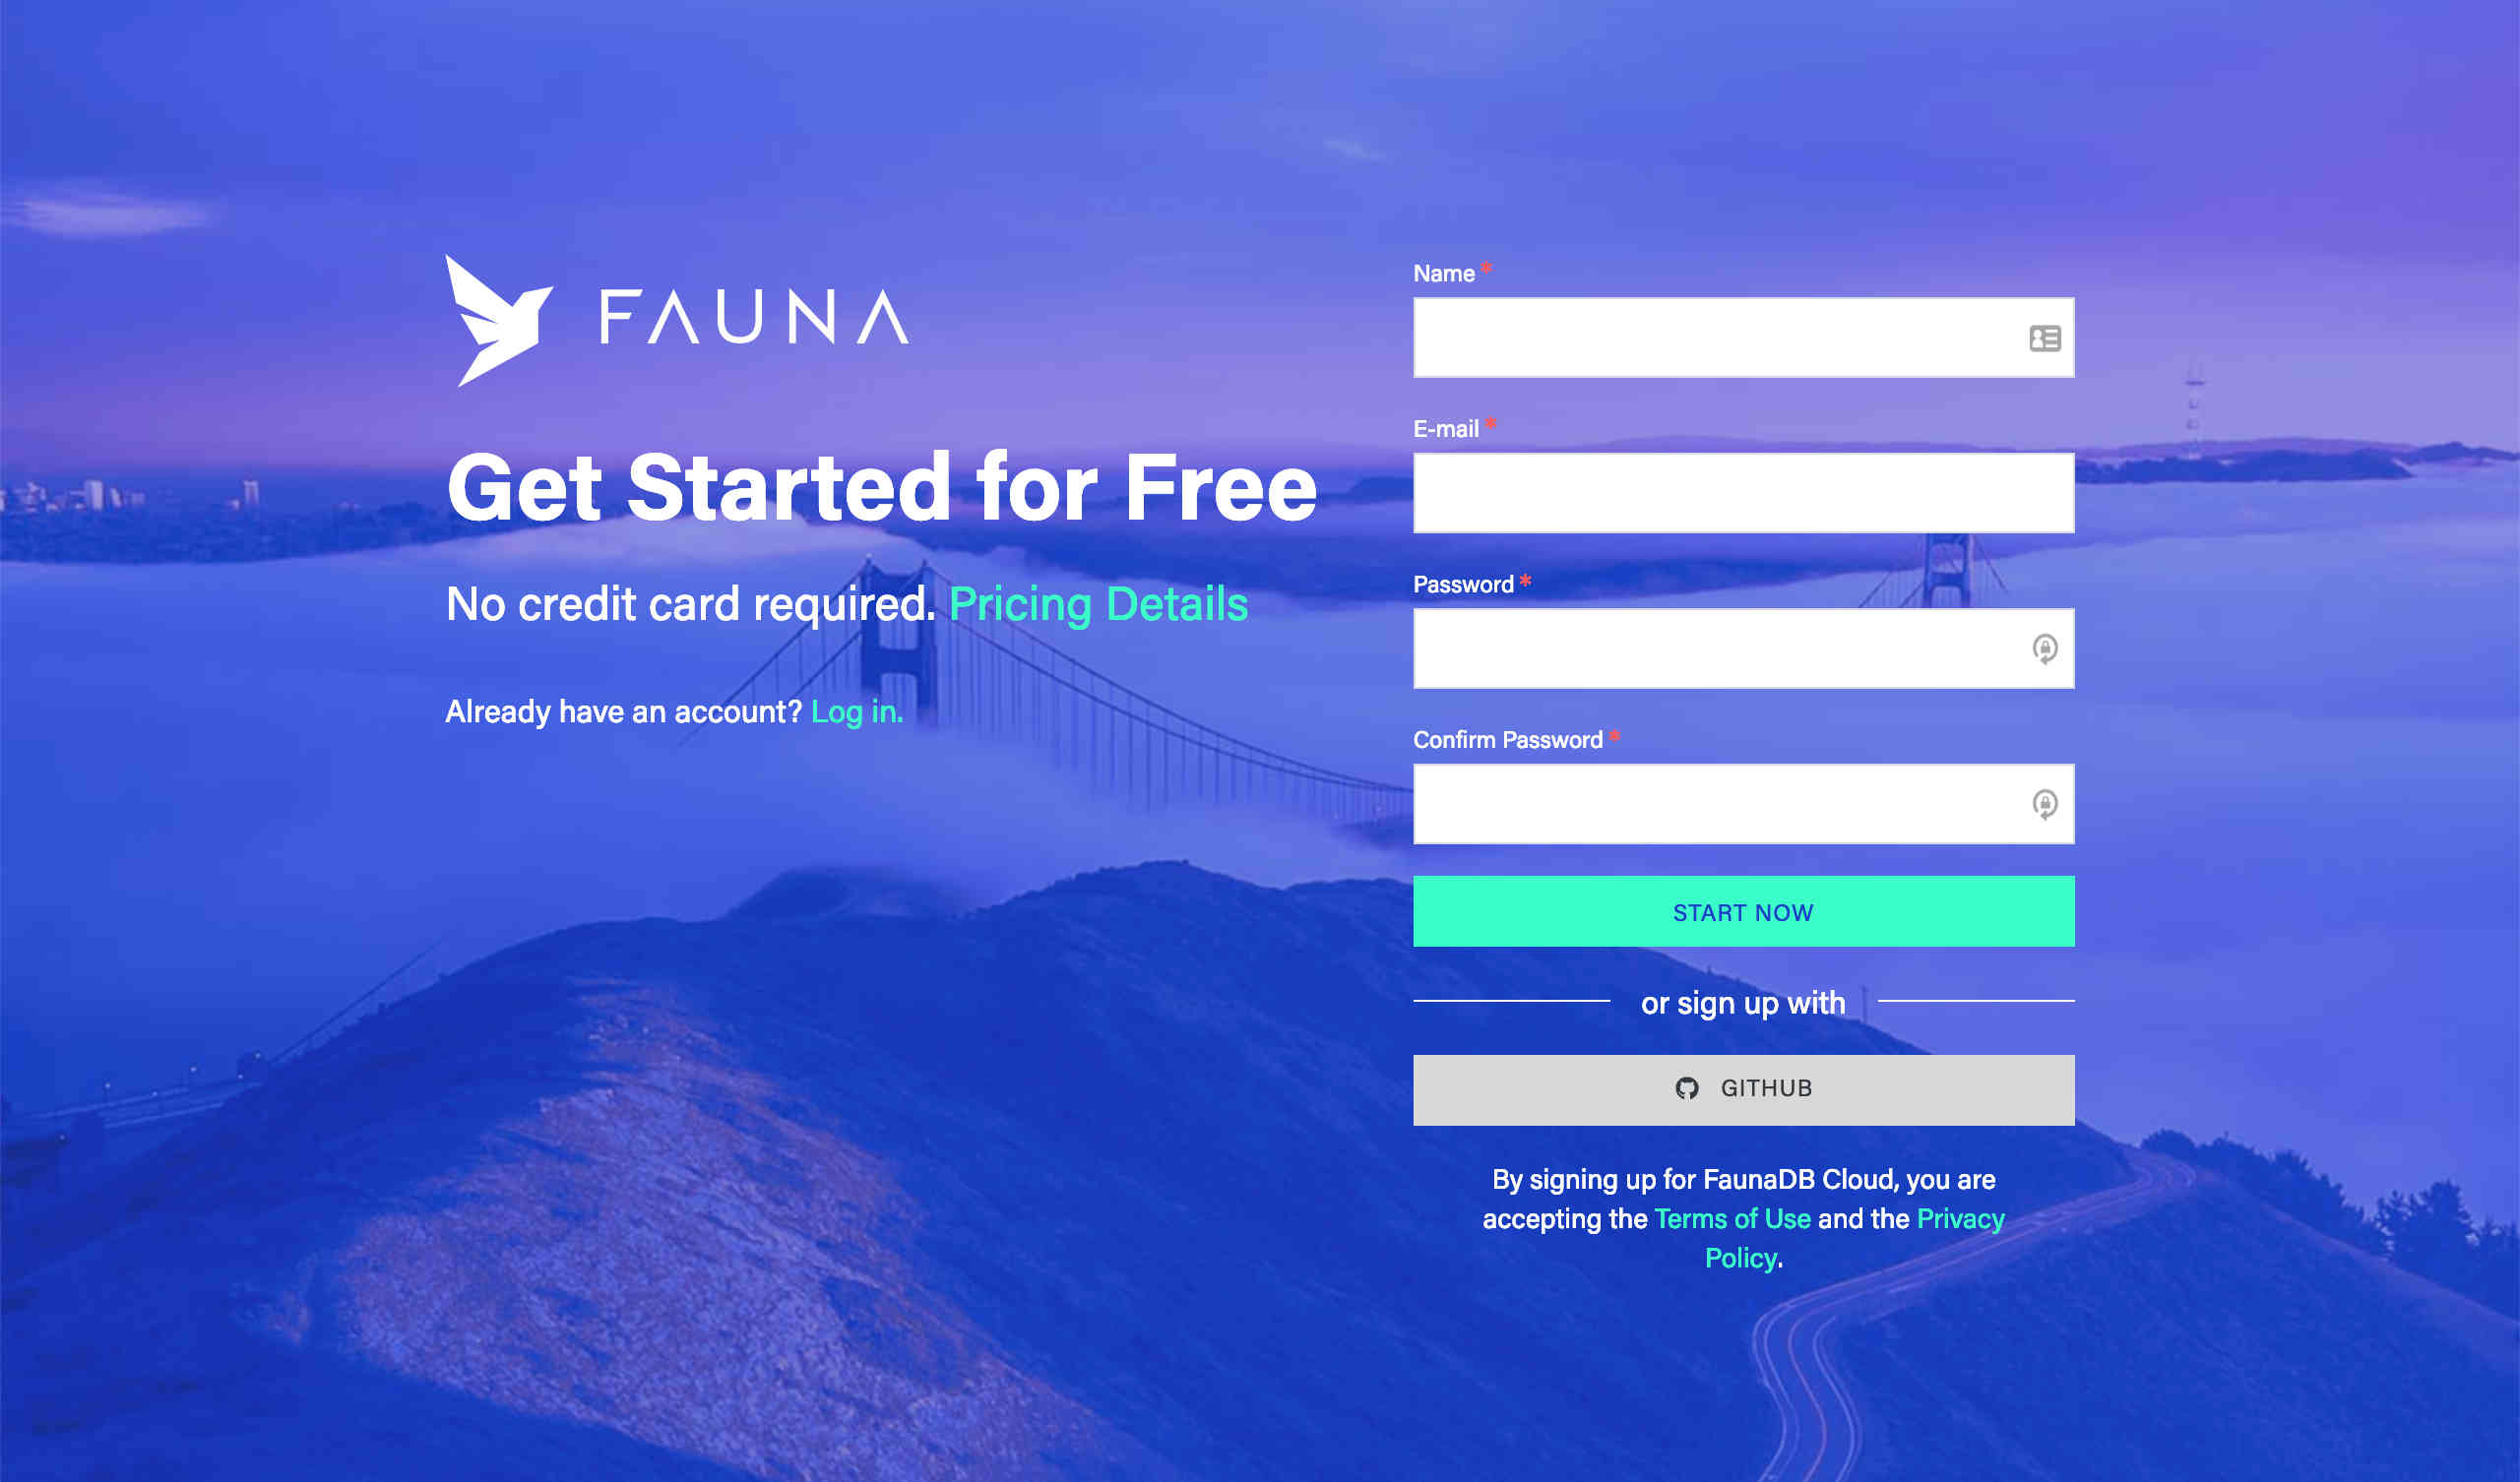 The Fauna sign up screen